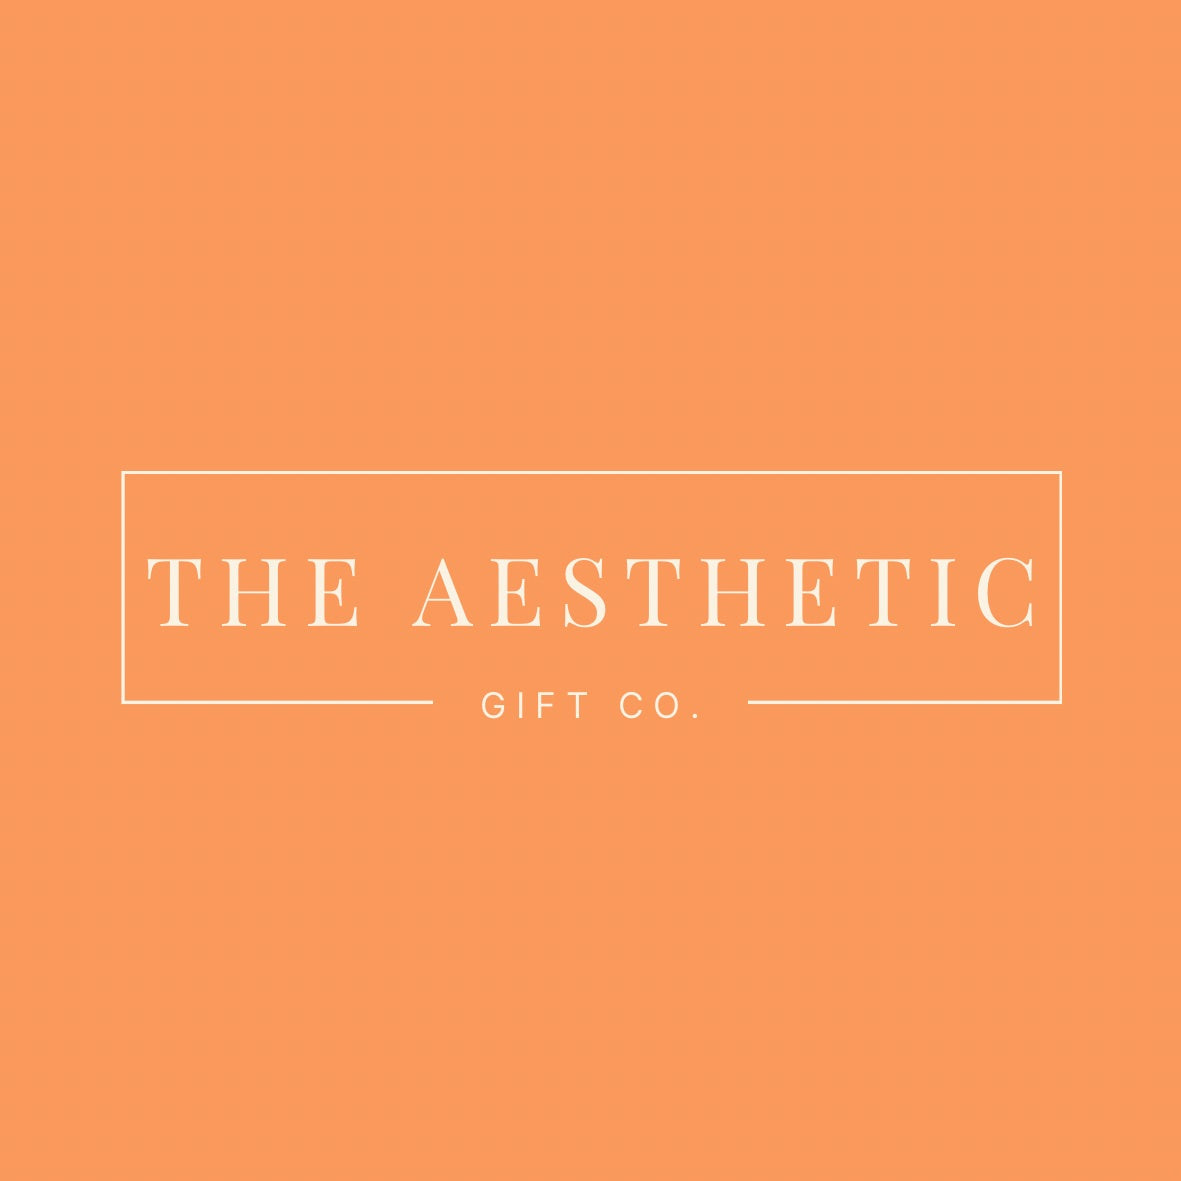 The Aesthetic Gift Co